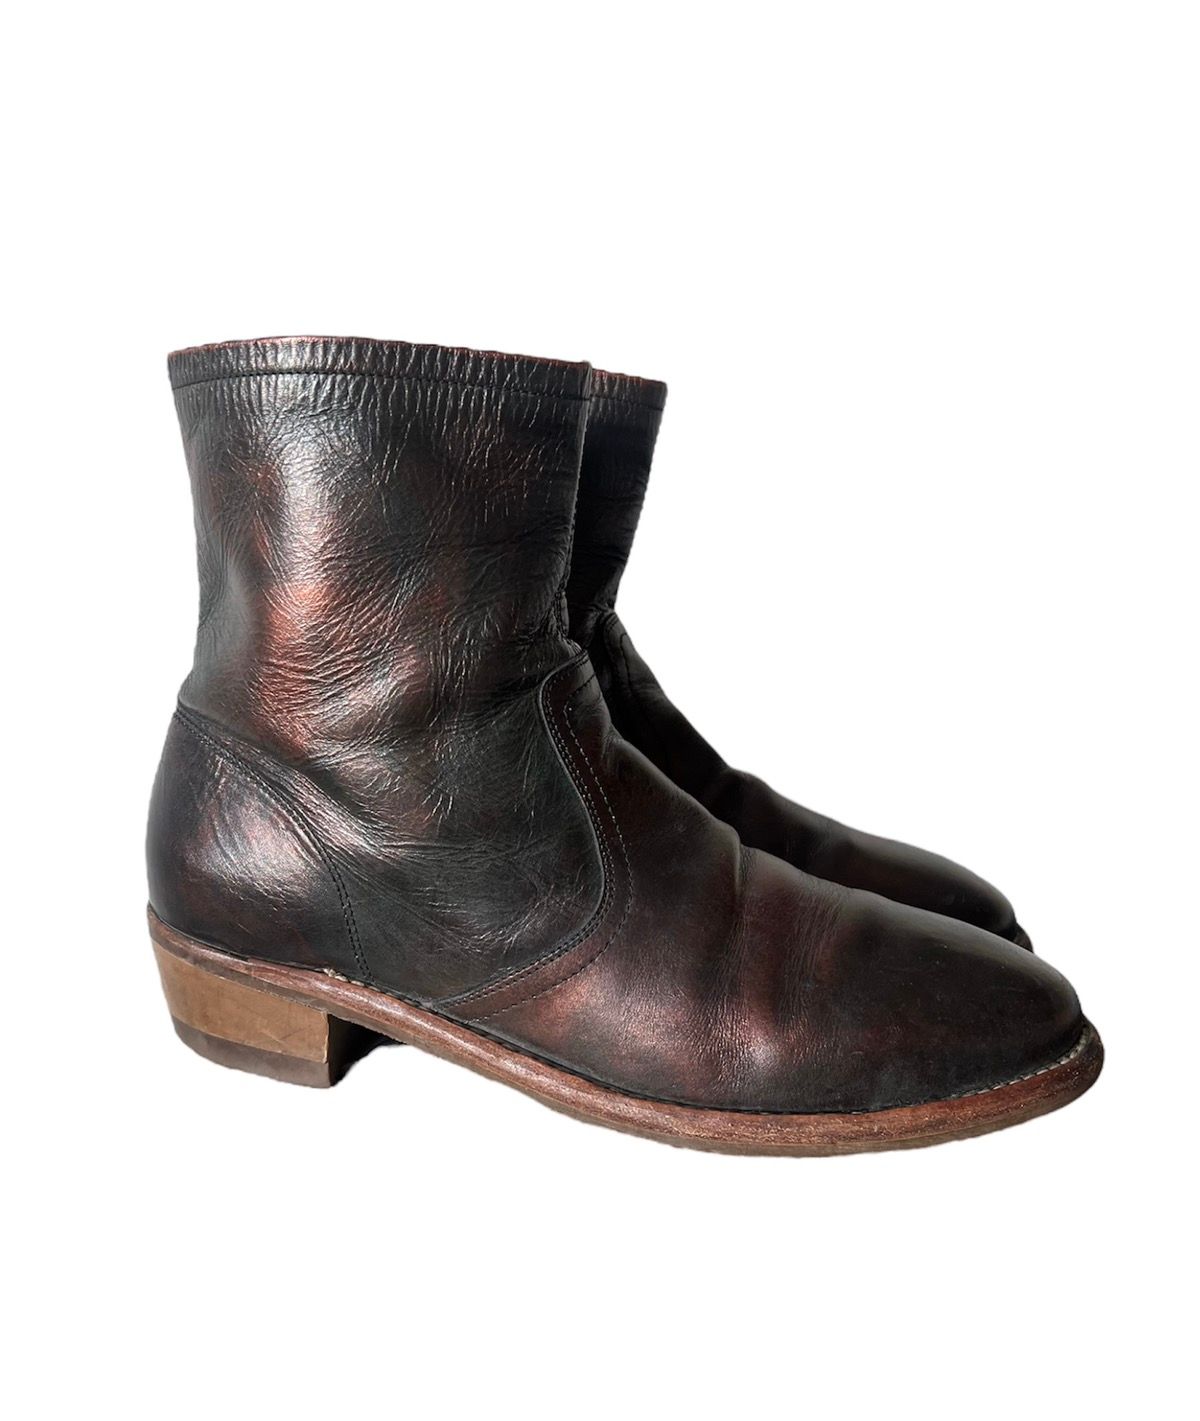 Maison Margiela Replica Campus High Ancle “Oil Spill” Leather Boots ...